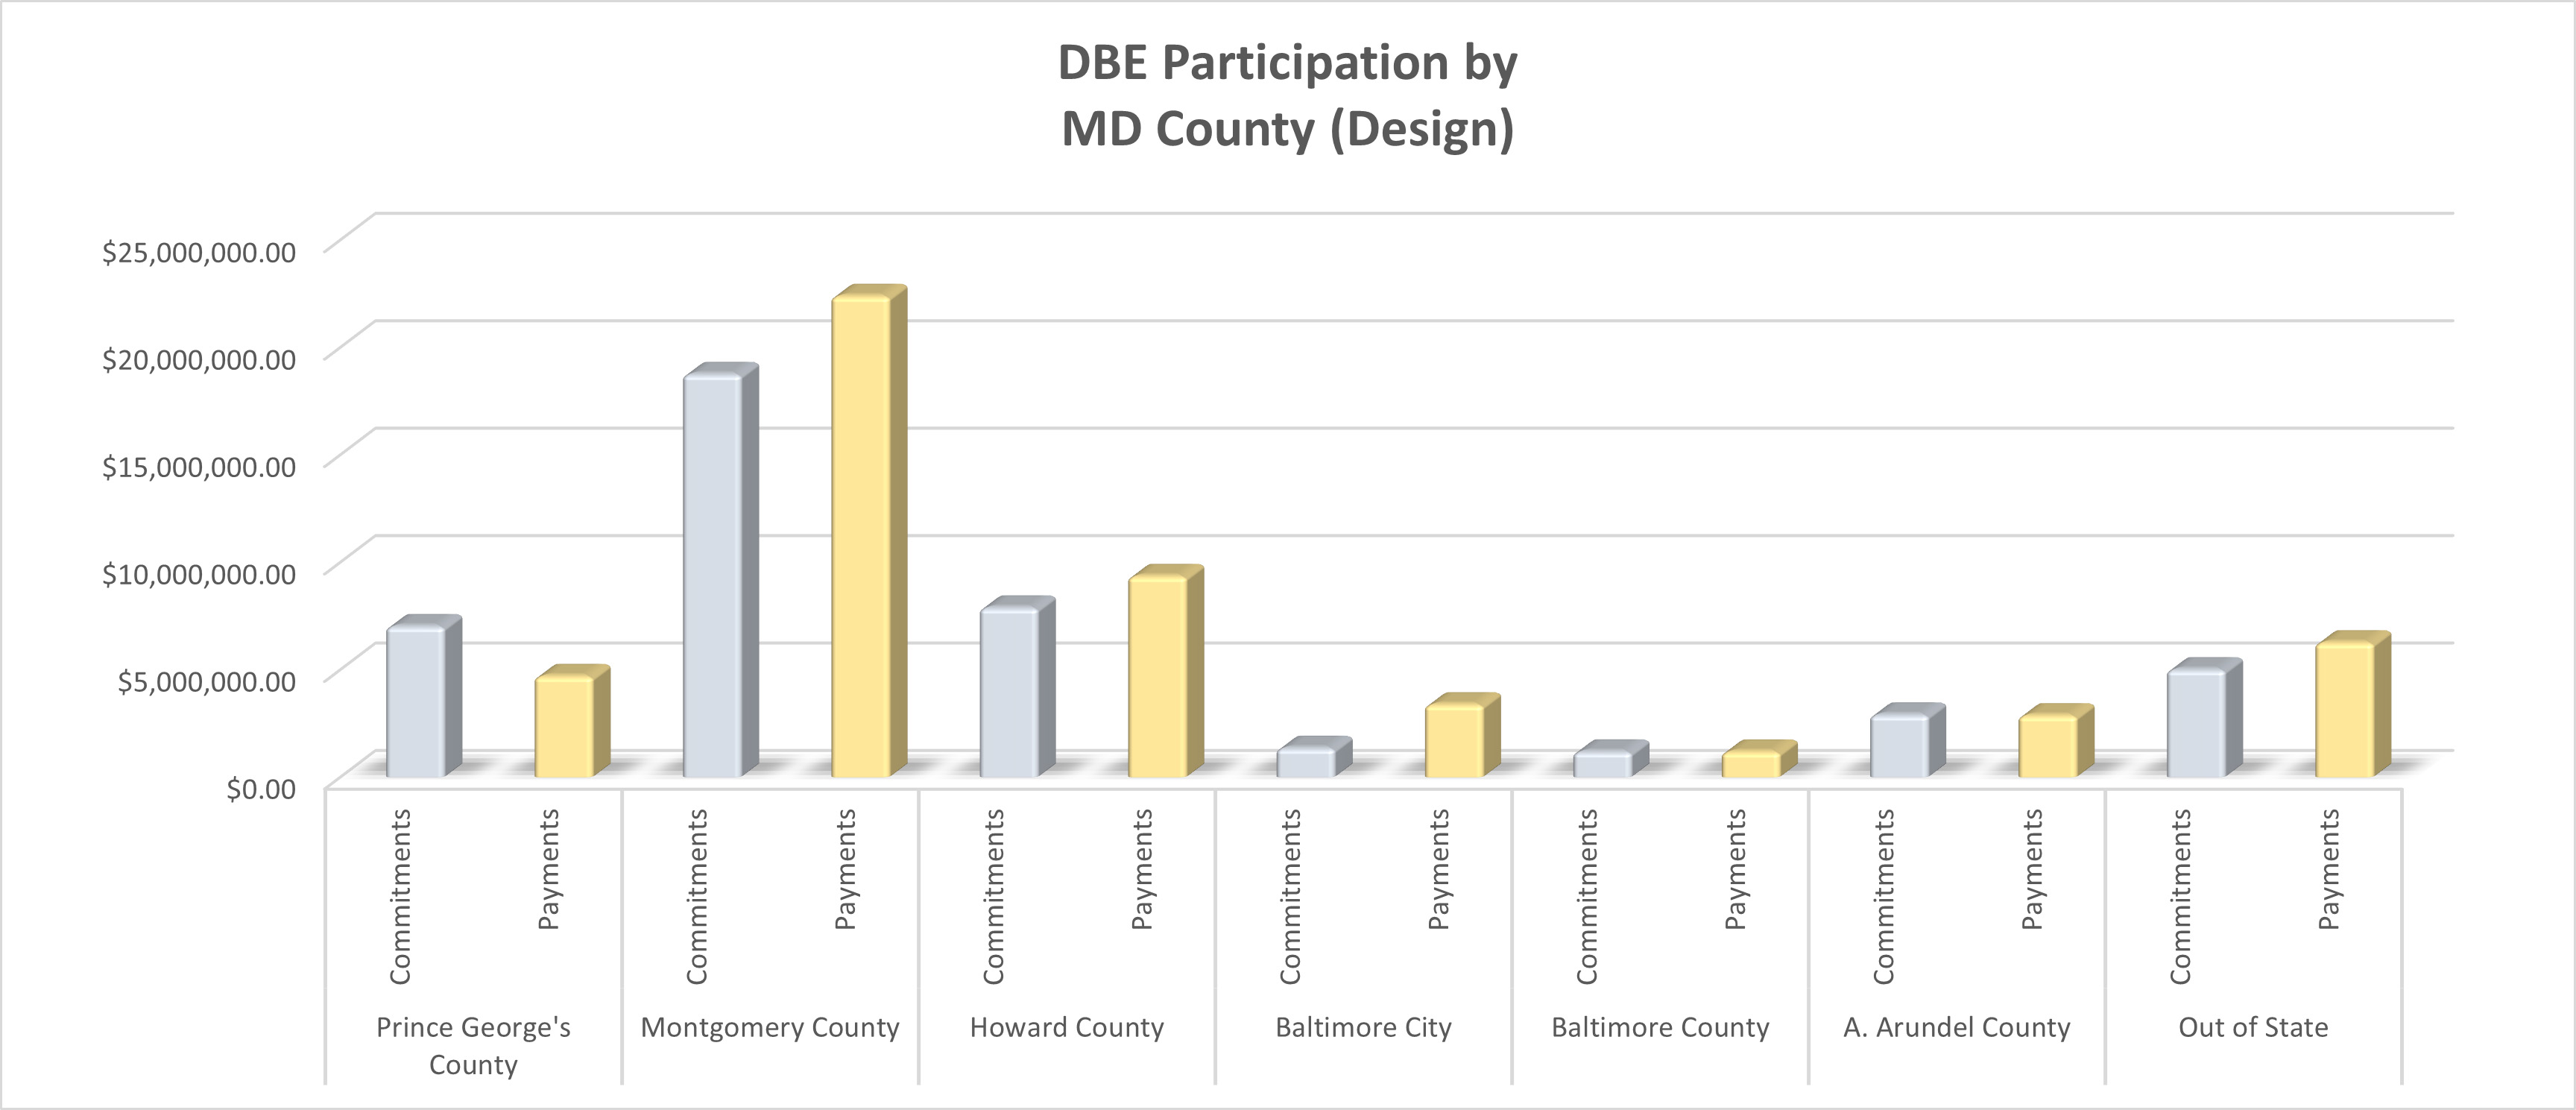 DBE Participation by MD County (Design)